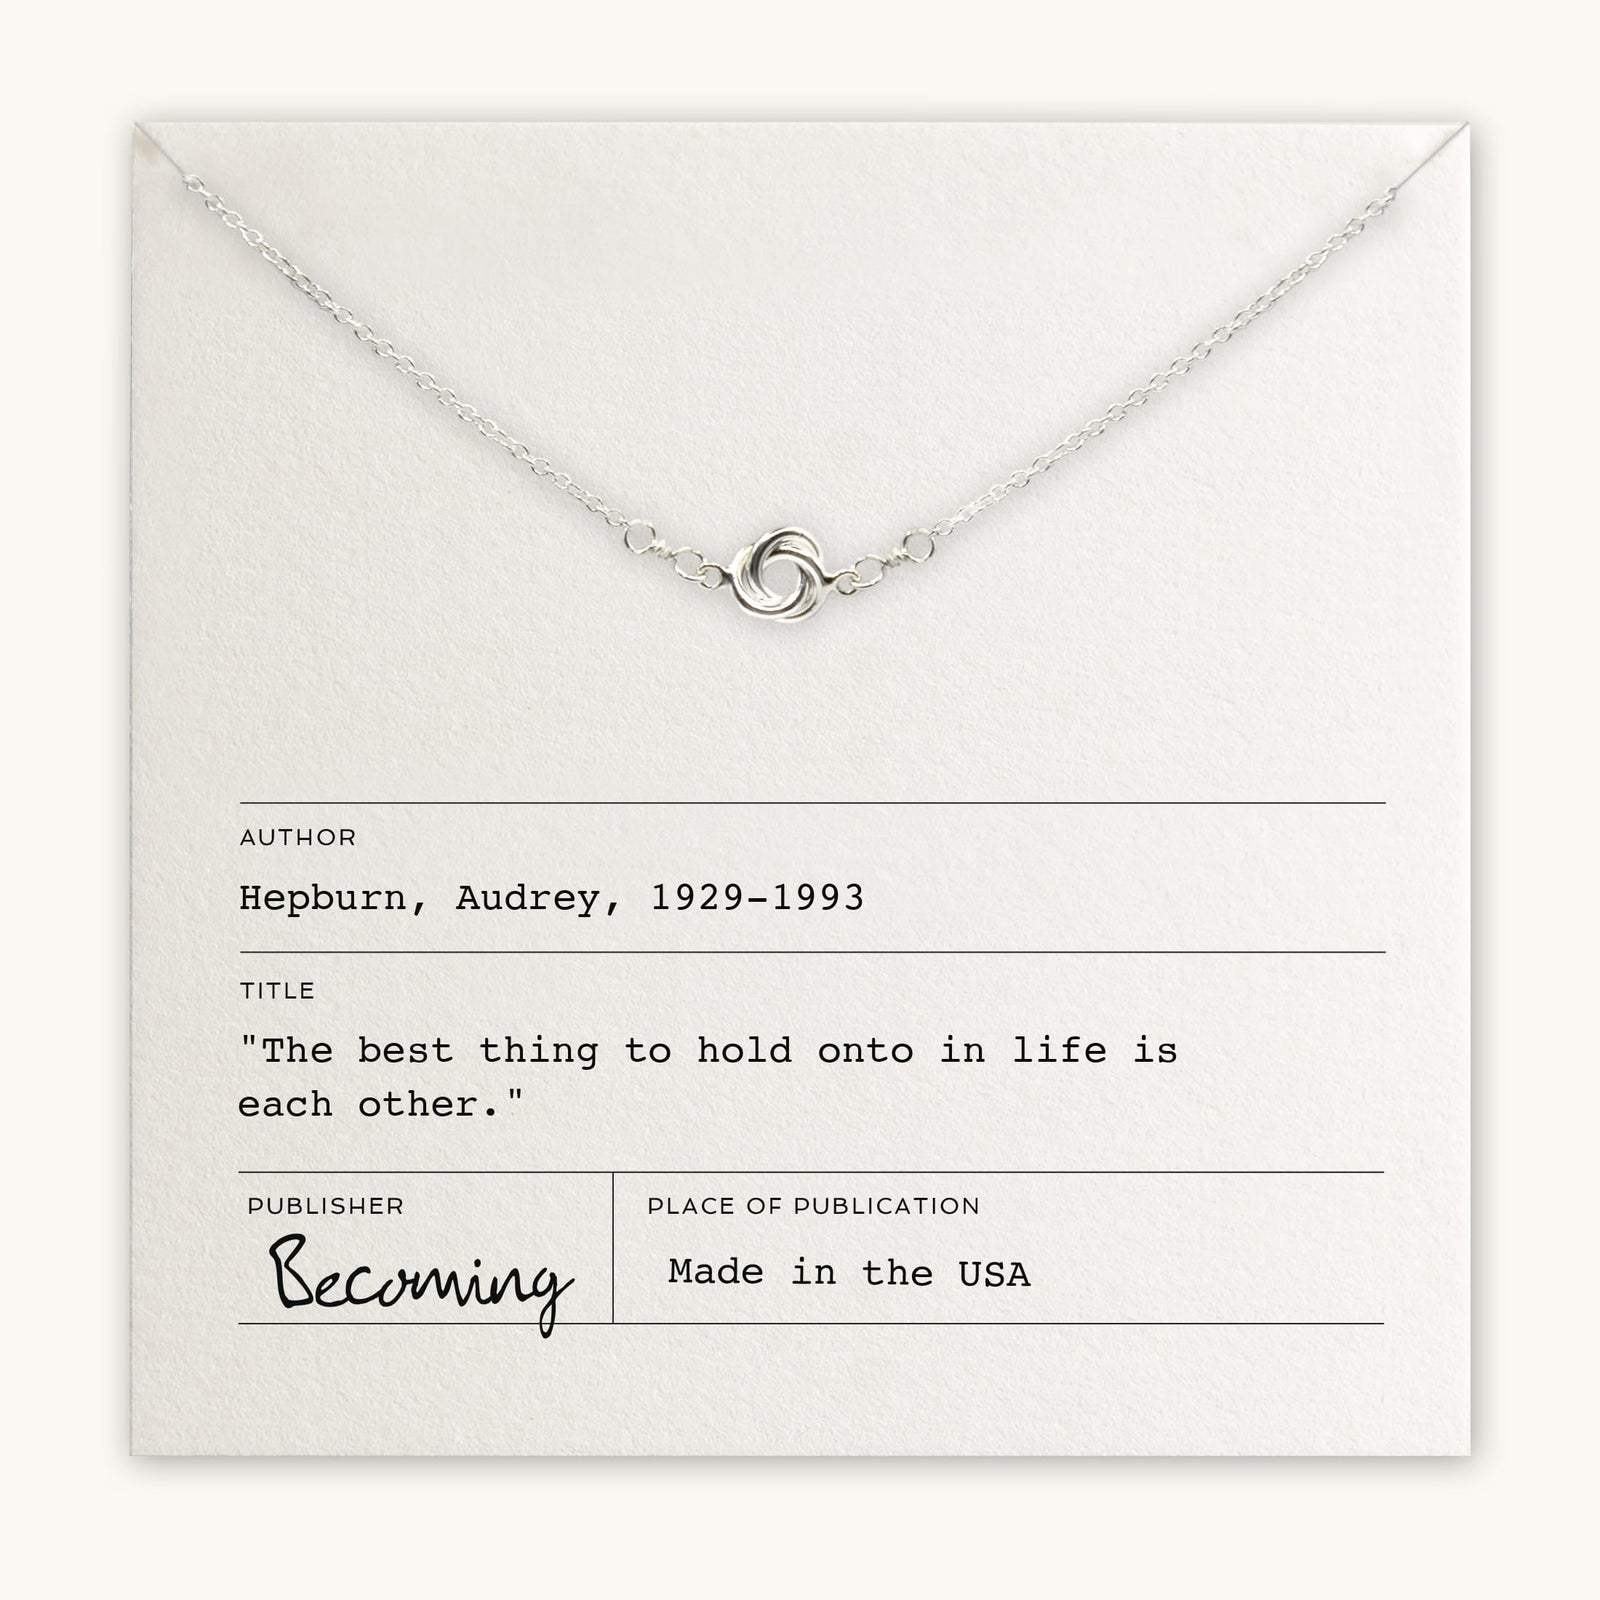 A Love Knot Necklace laid over a card with a quote by Audrey Hepburn, titled 